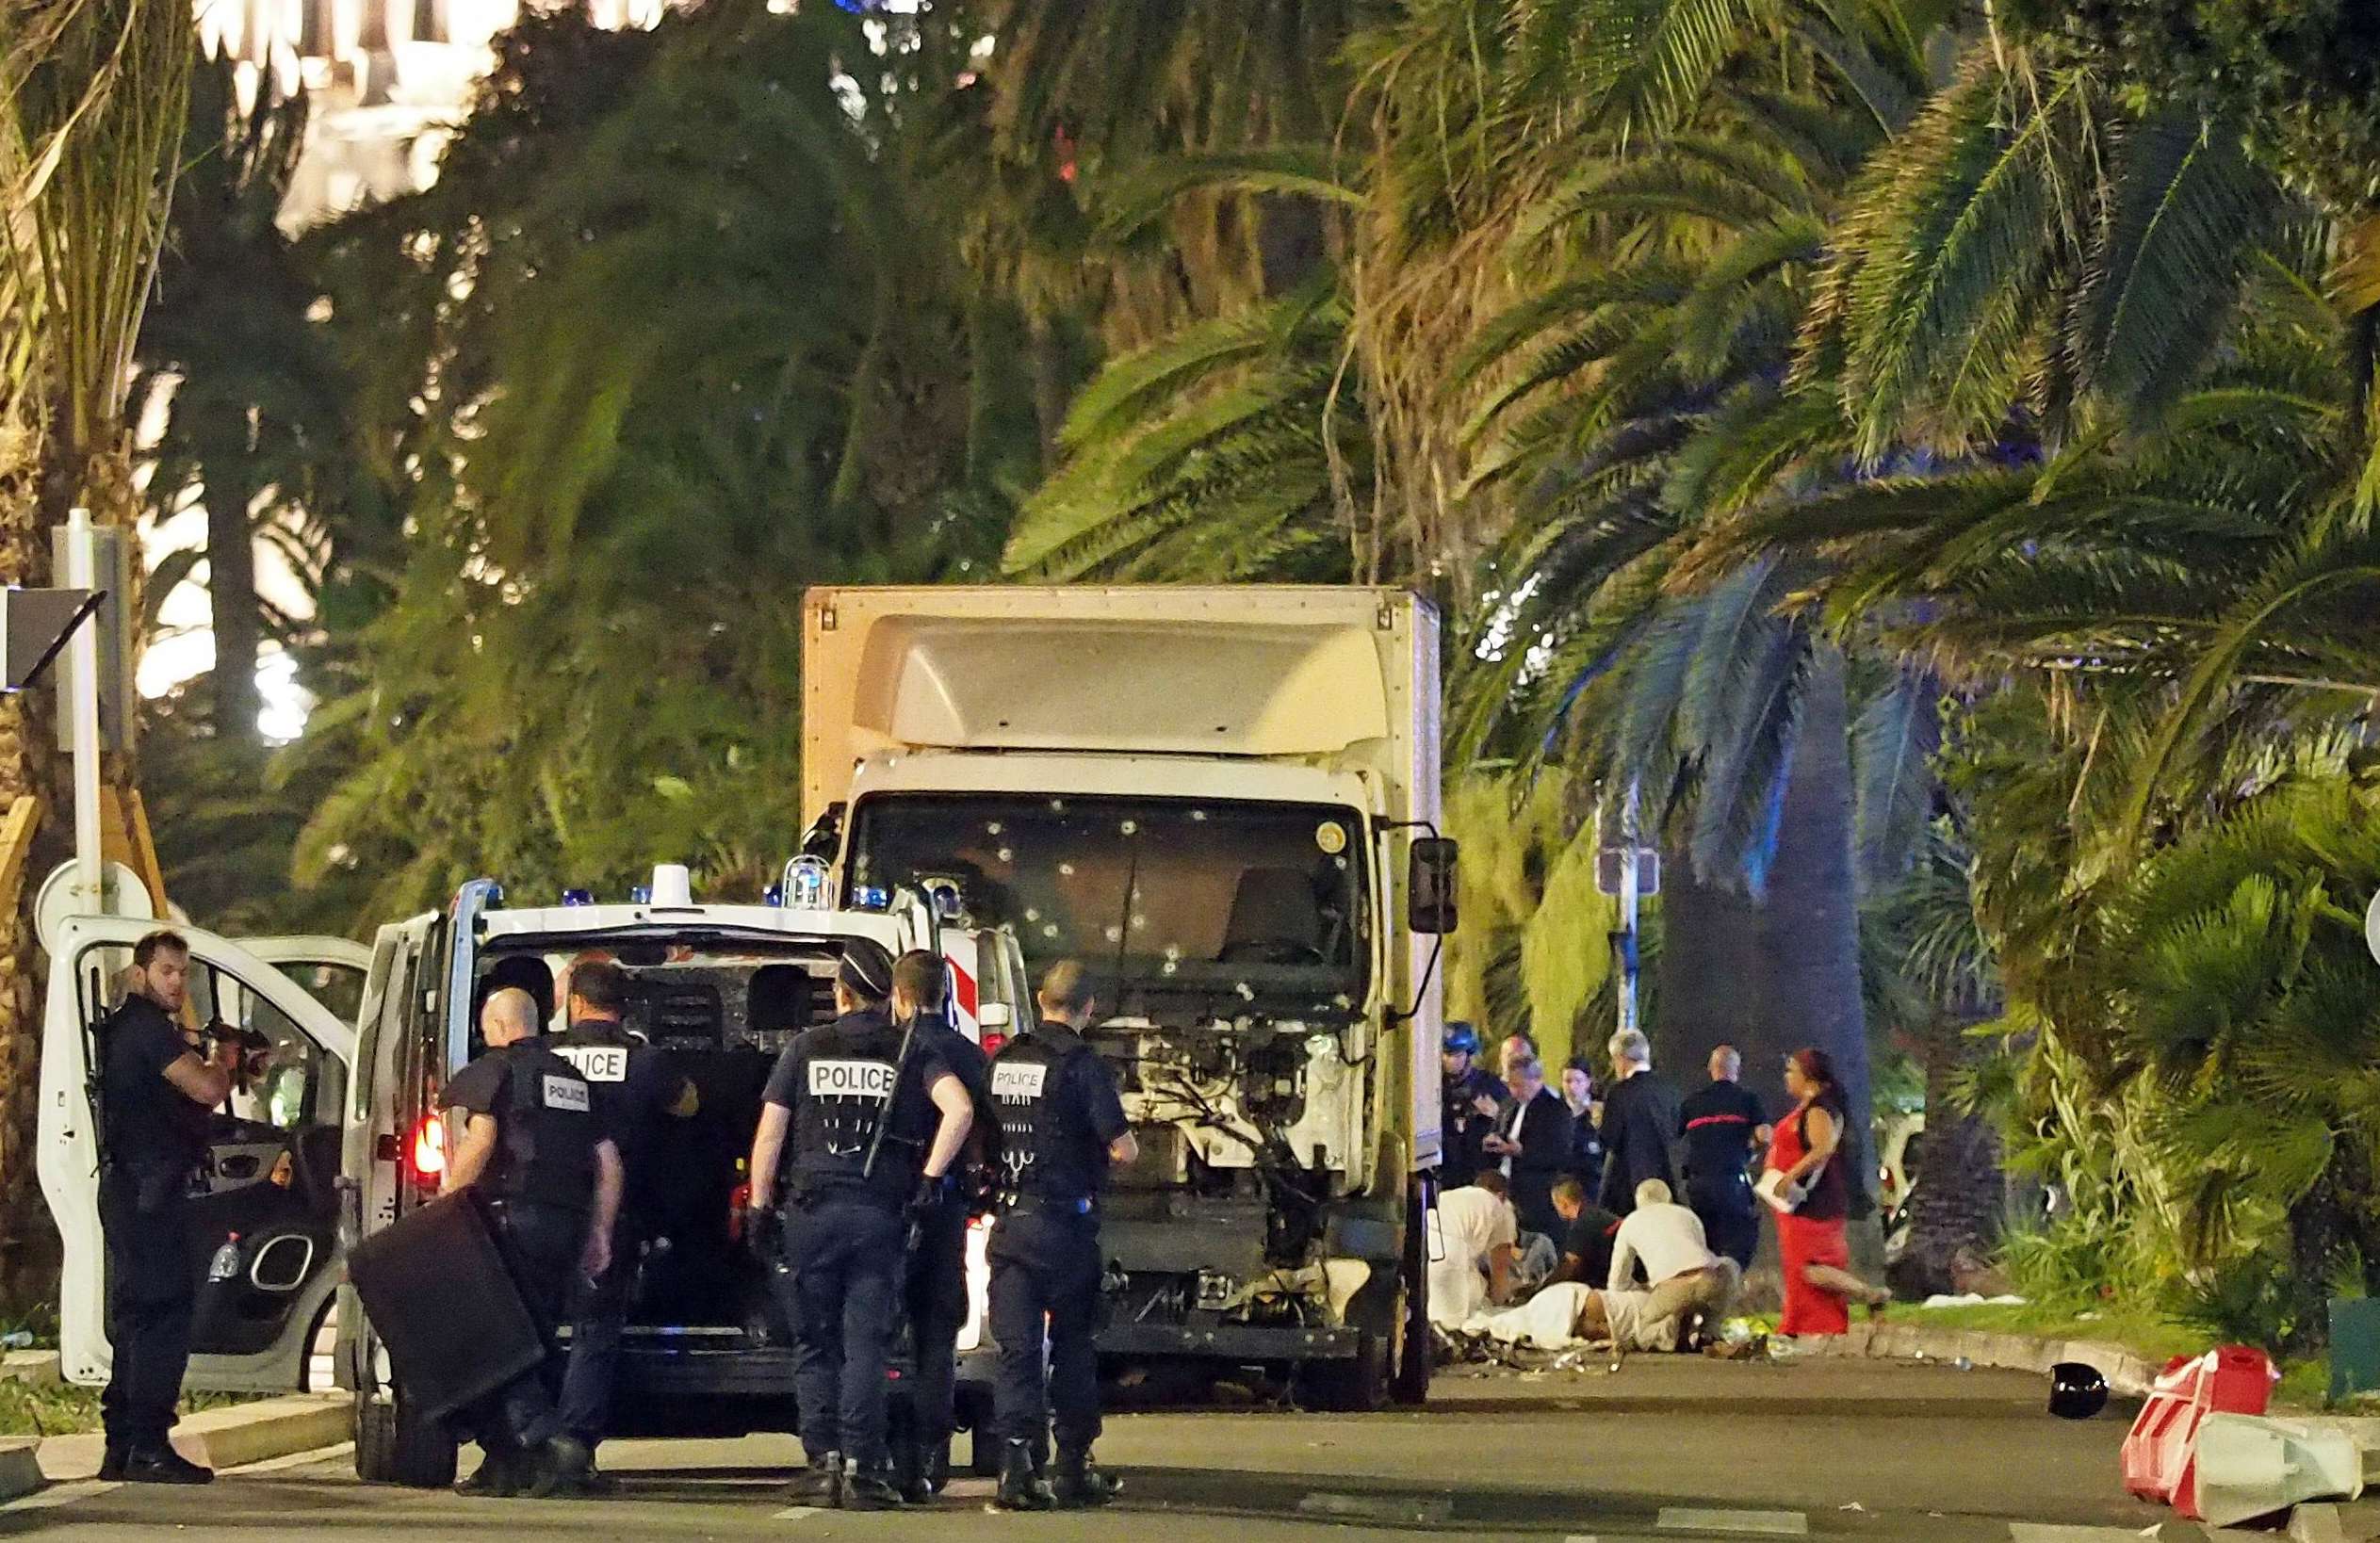 Police stand by as medical personnel attend a person on the ground, right, in the early hours of Friday, July 14, 2016, on the Promenade des Anglais in Nice, southern France, next to the lorry that had been driven into crowds of revellers late on Thursday. Photo: AP